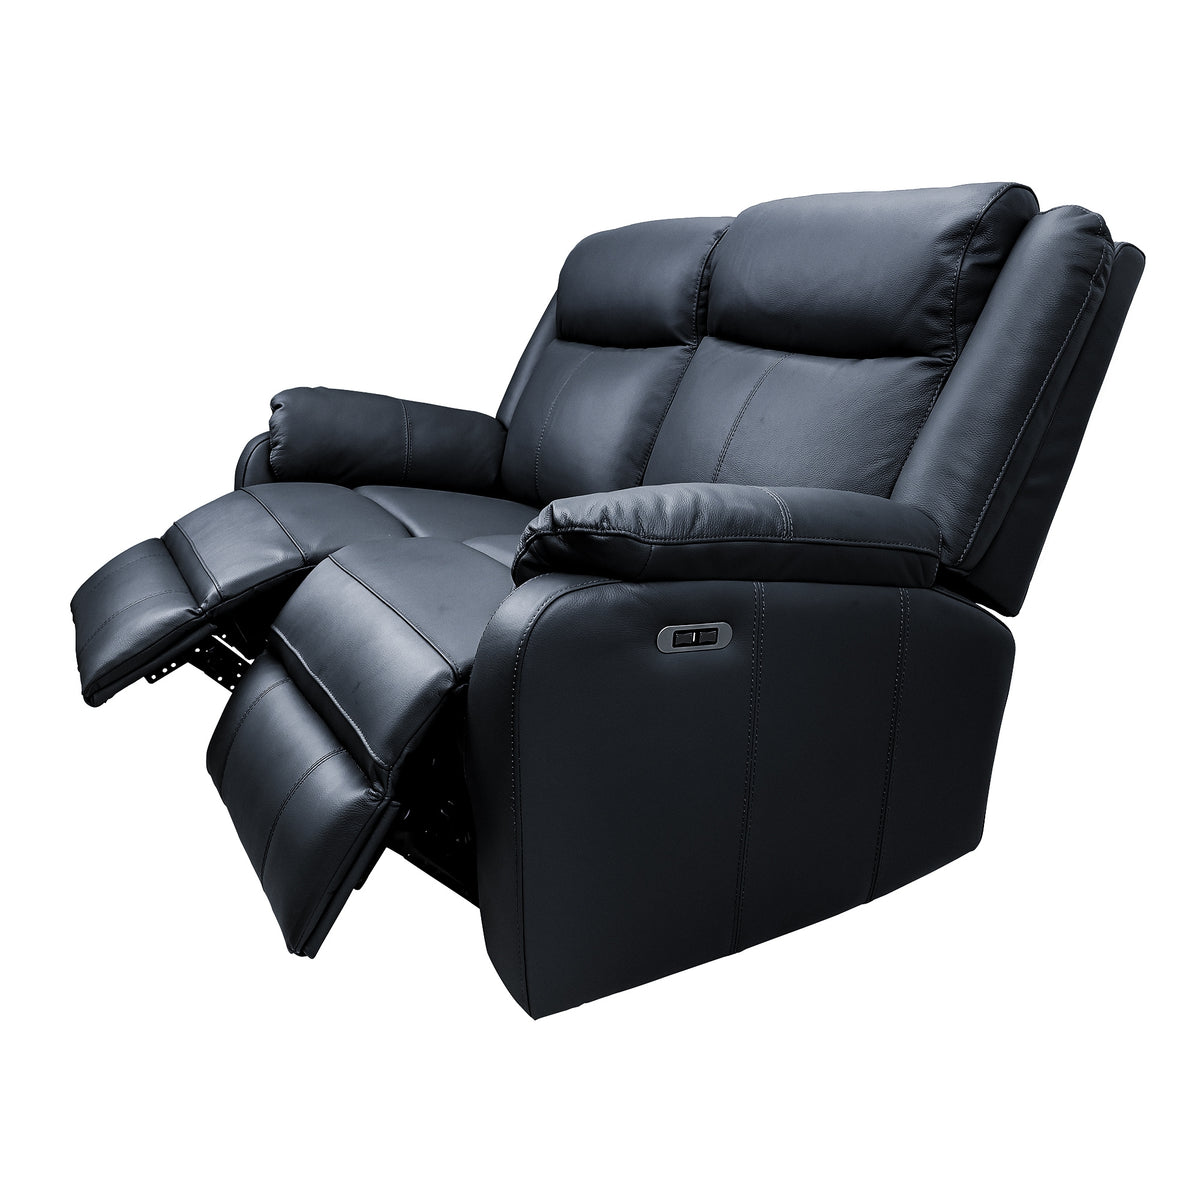 Bella 2 Seater Leather Electric Recliner Sofa Lounge Black 